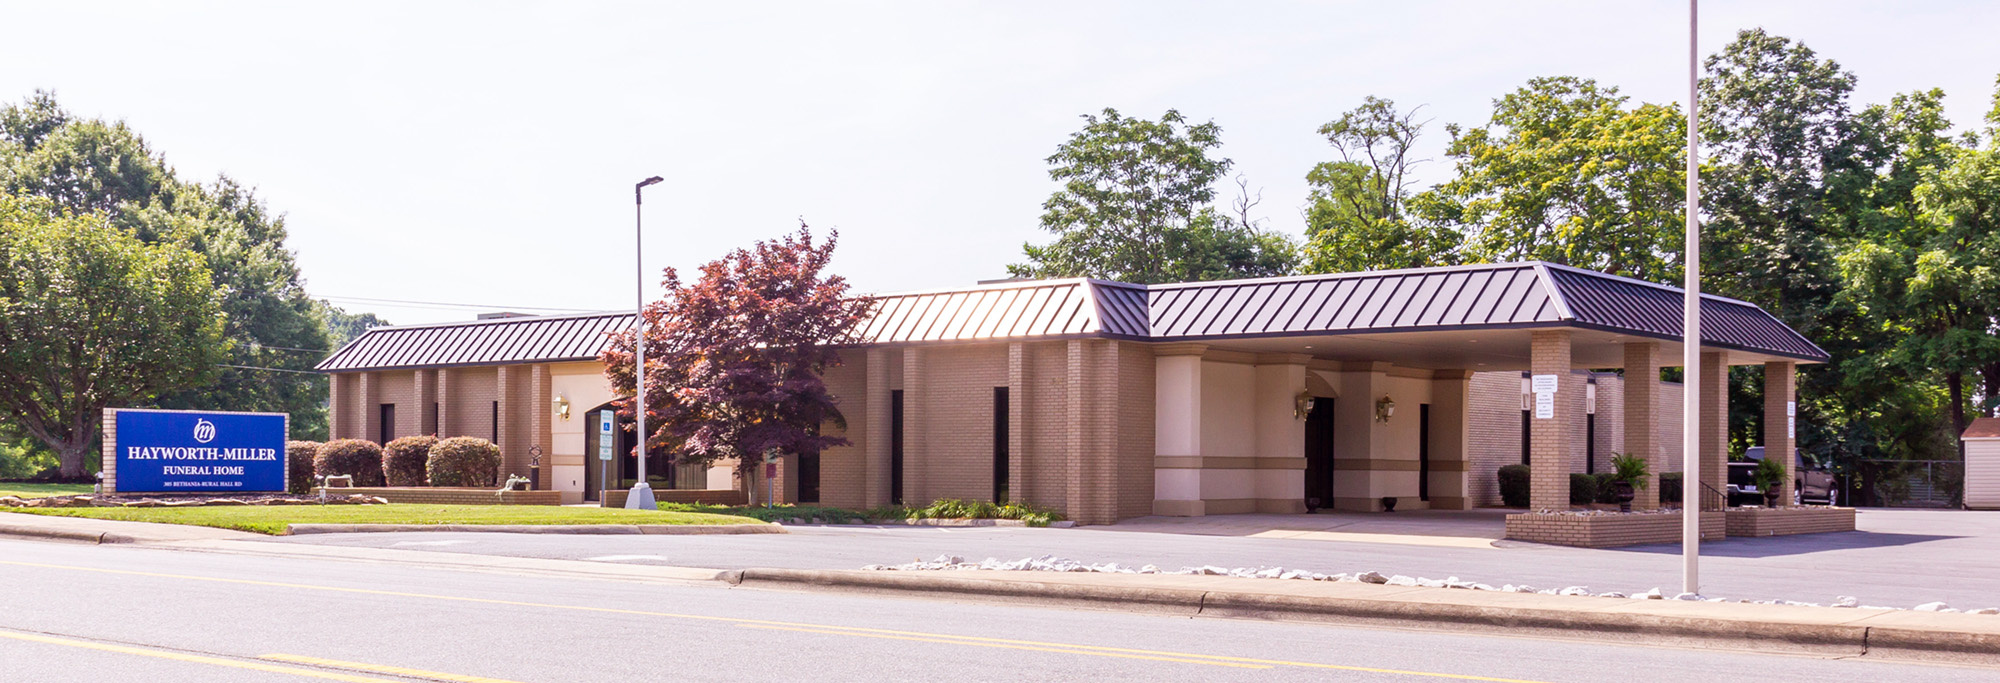 Hayworth-Miller Funeral Homes & Crematory